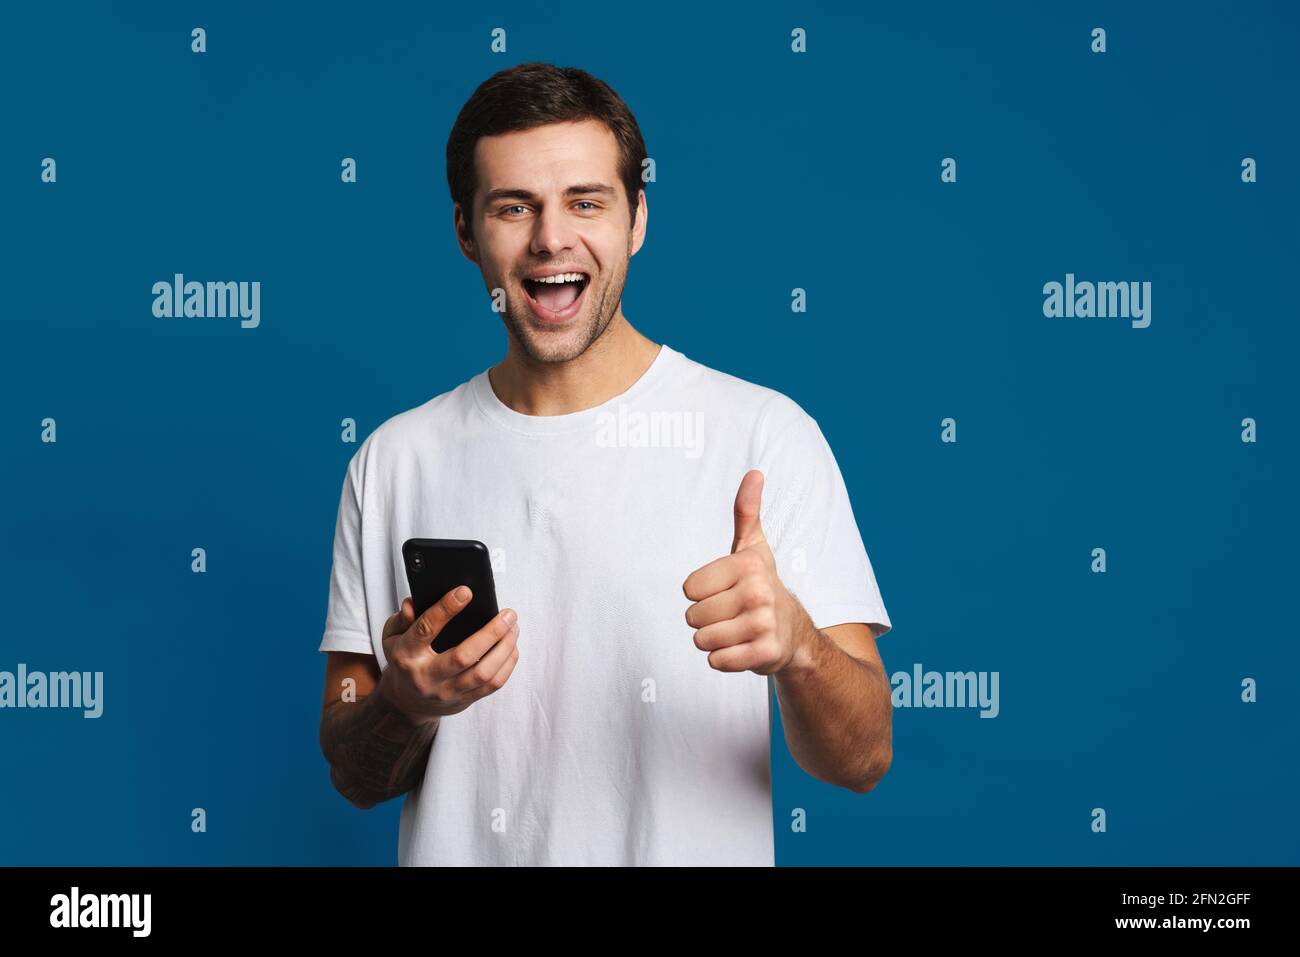 Happy unshaven guy showing thumb up while using mobile phone isolated over blue background Stock Photo